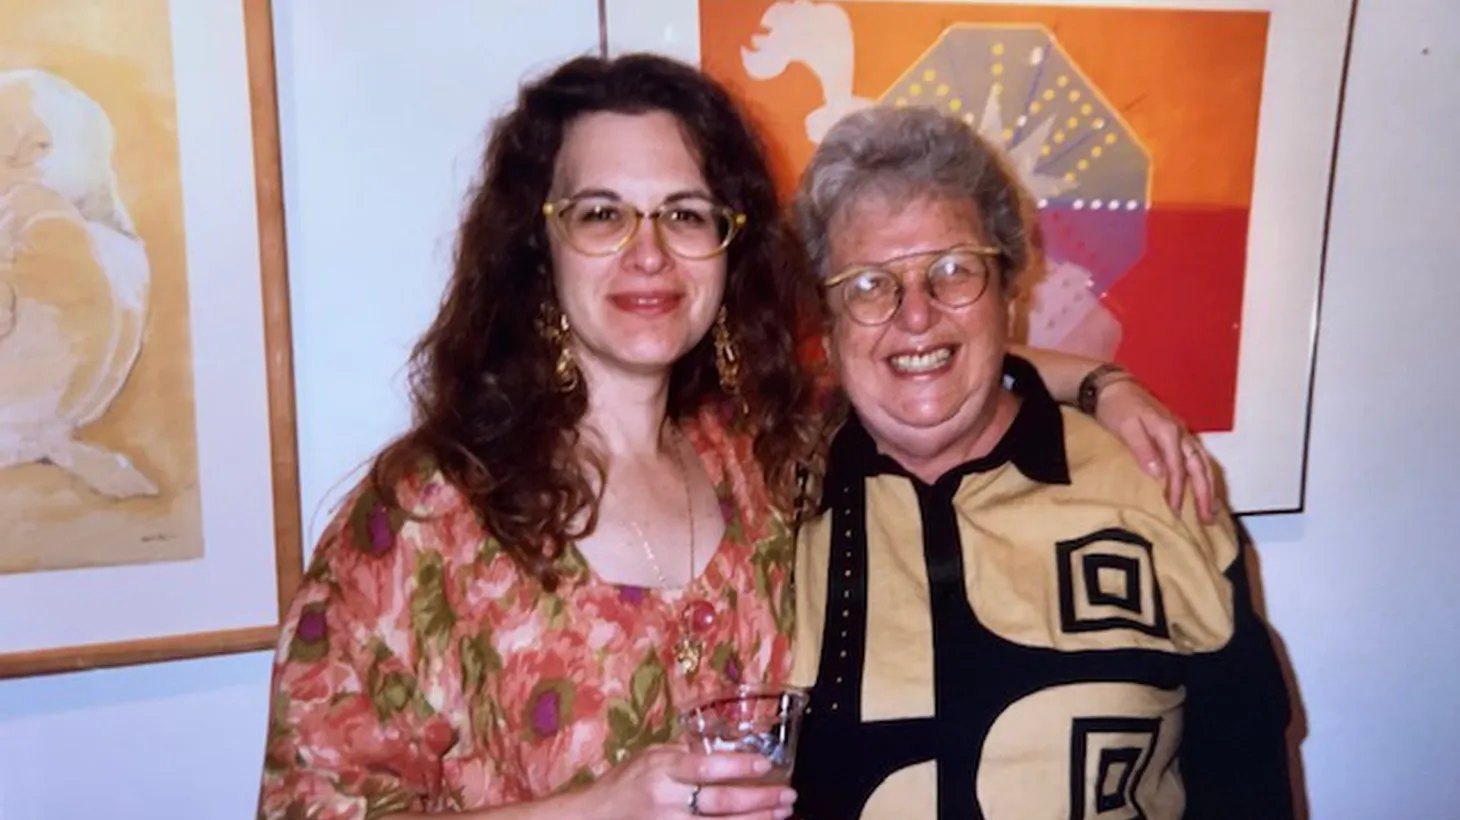 Good Food host Evan Kleiman has spent over two decades recalling stories about her mom, Eadie. This week she invites other chefs to share how their mothers informed their cooking.